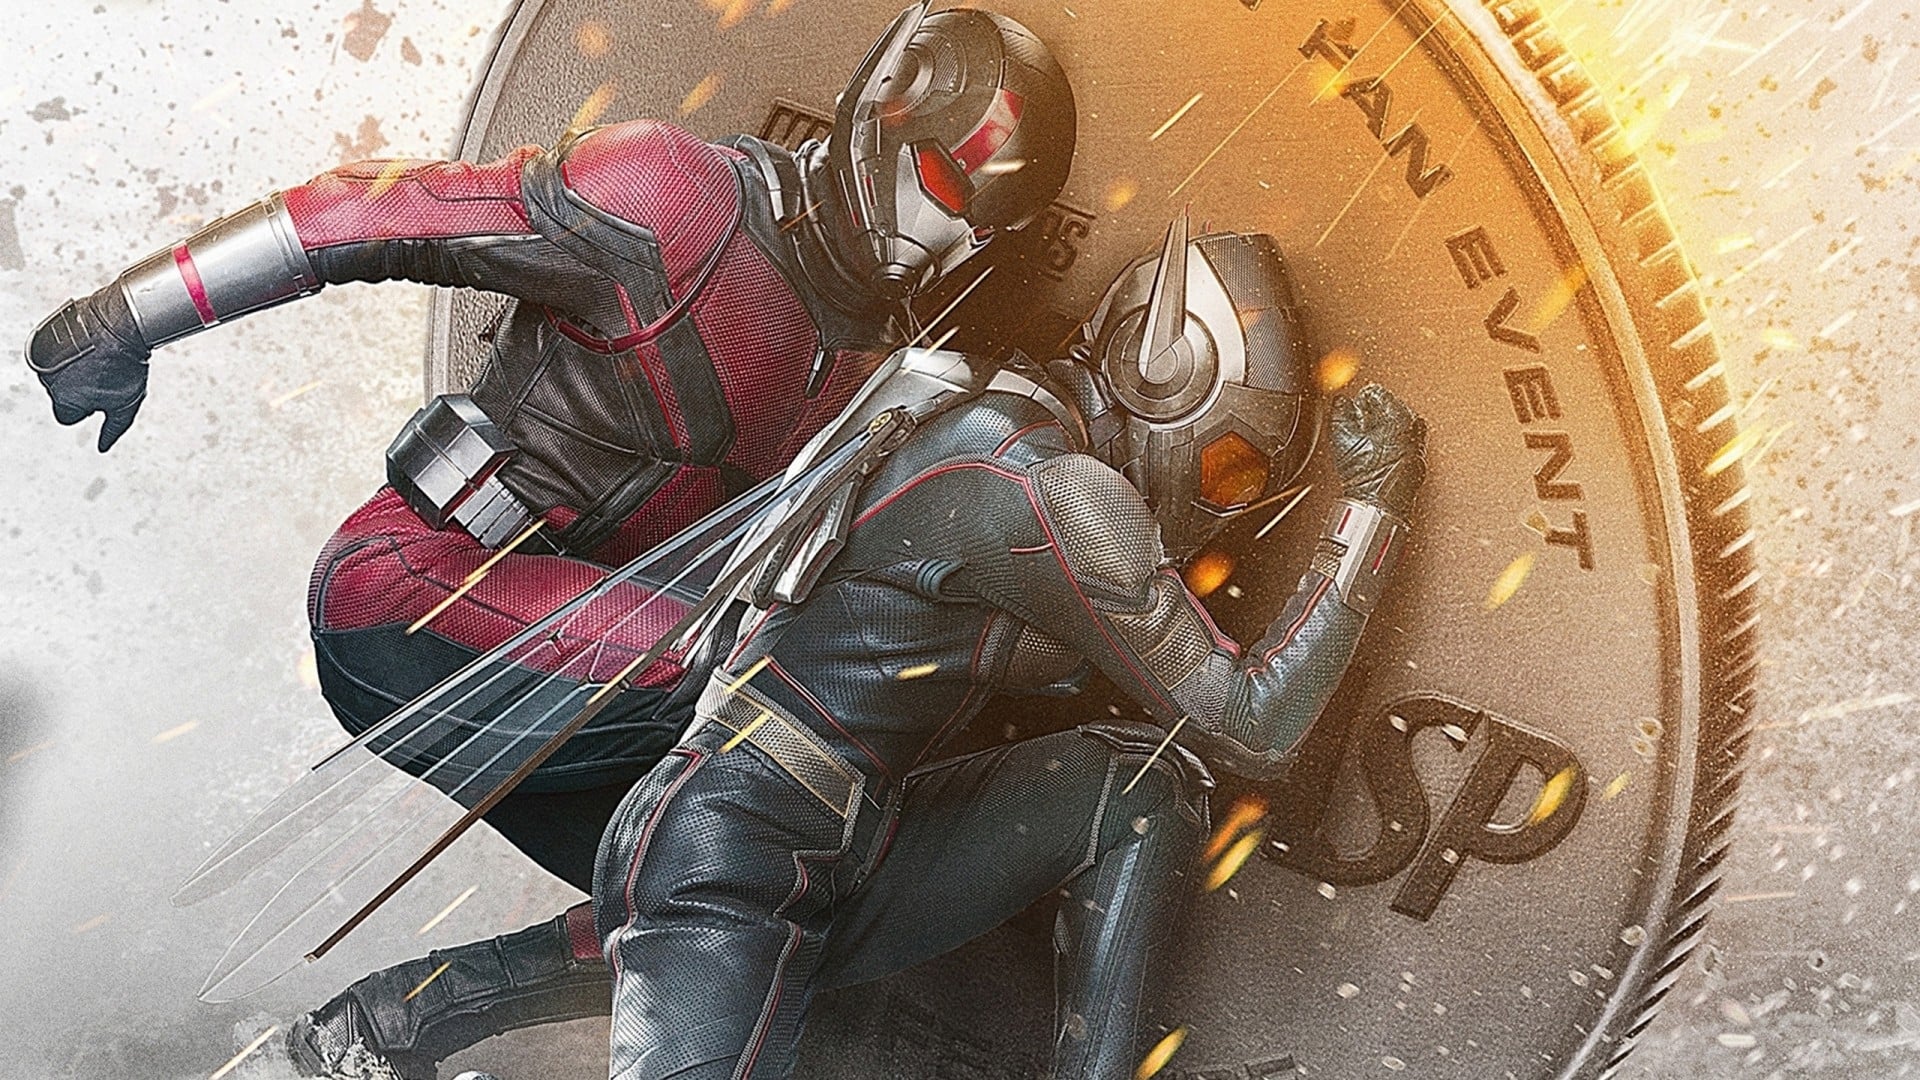 Ant-Man And The Wasp Kinostart